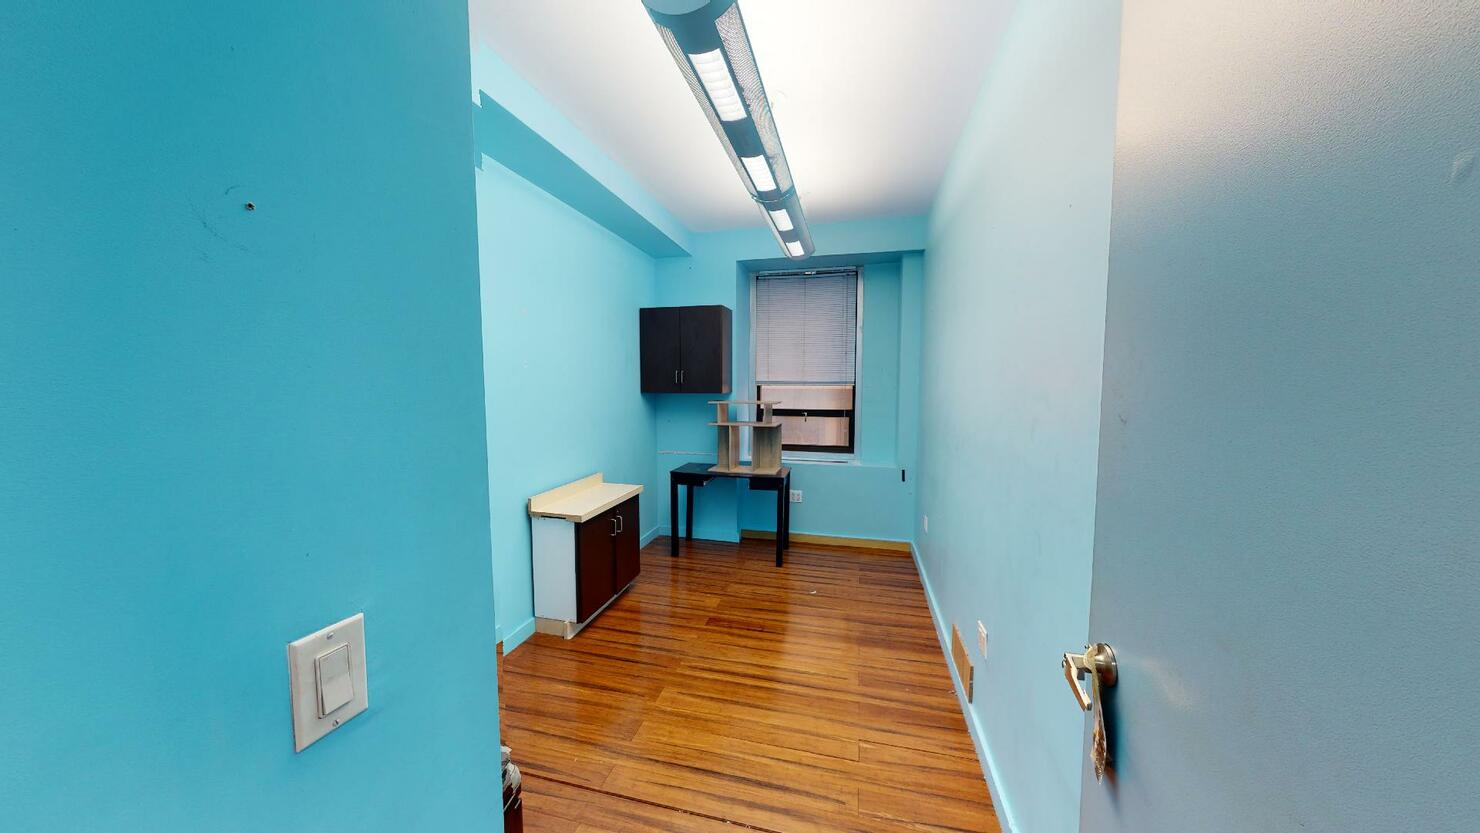 369 Lexington Avenue Office Space - Office Room with Blue Walls